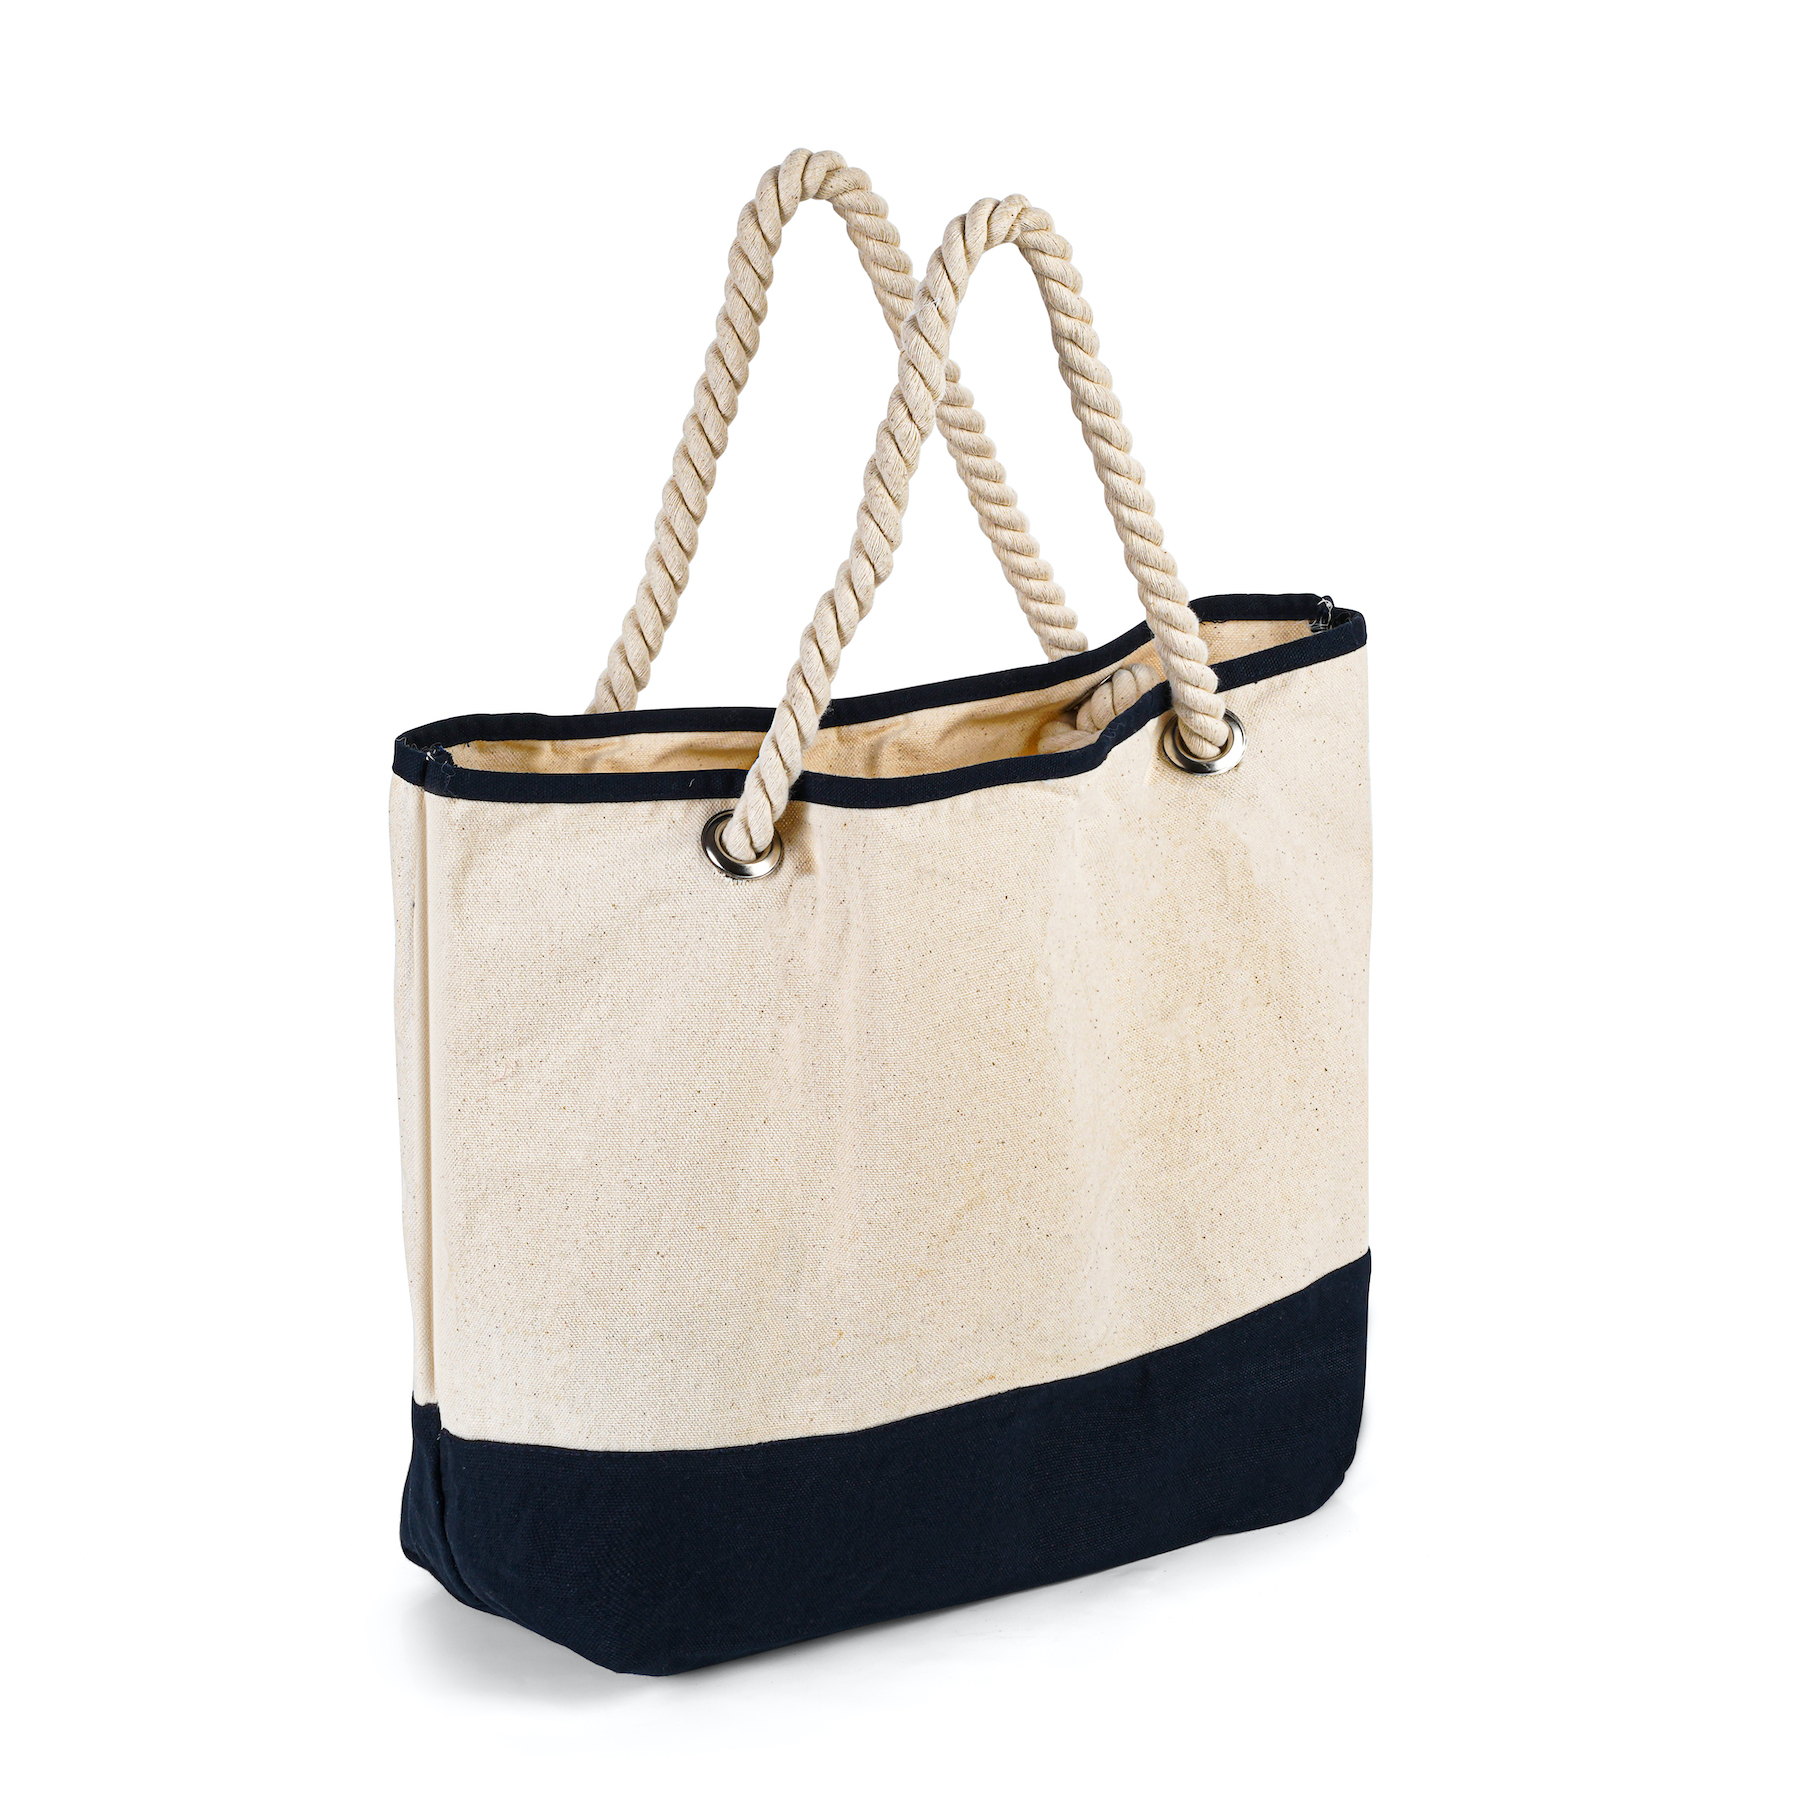 Day & Night bag, Dark melange & white cotton rope tote bag, handcrafted  with love.